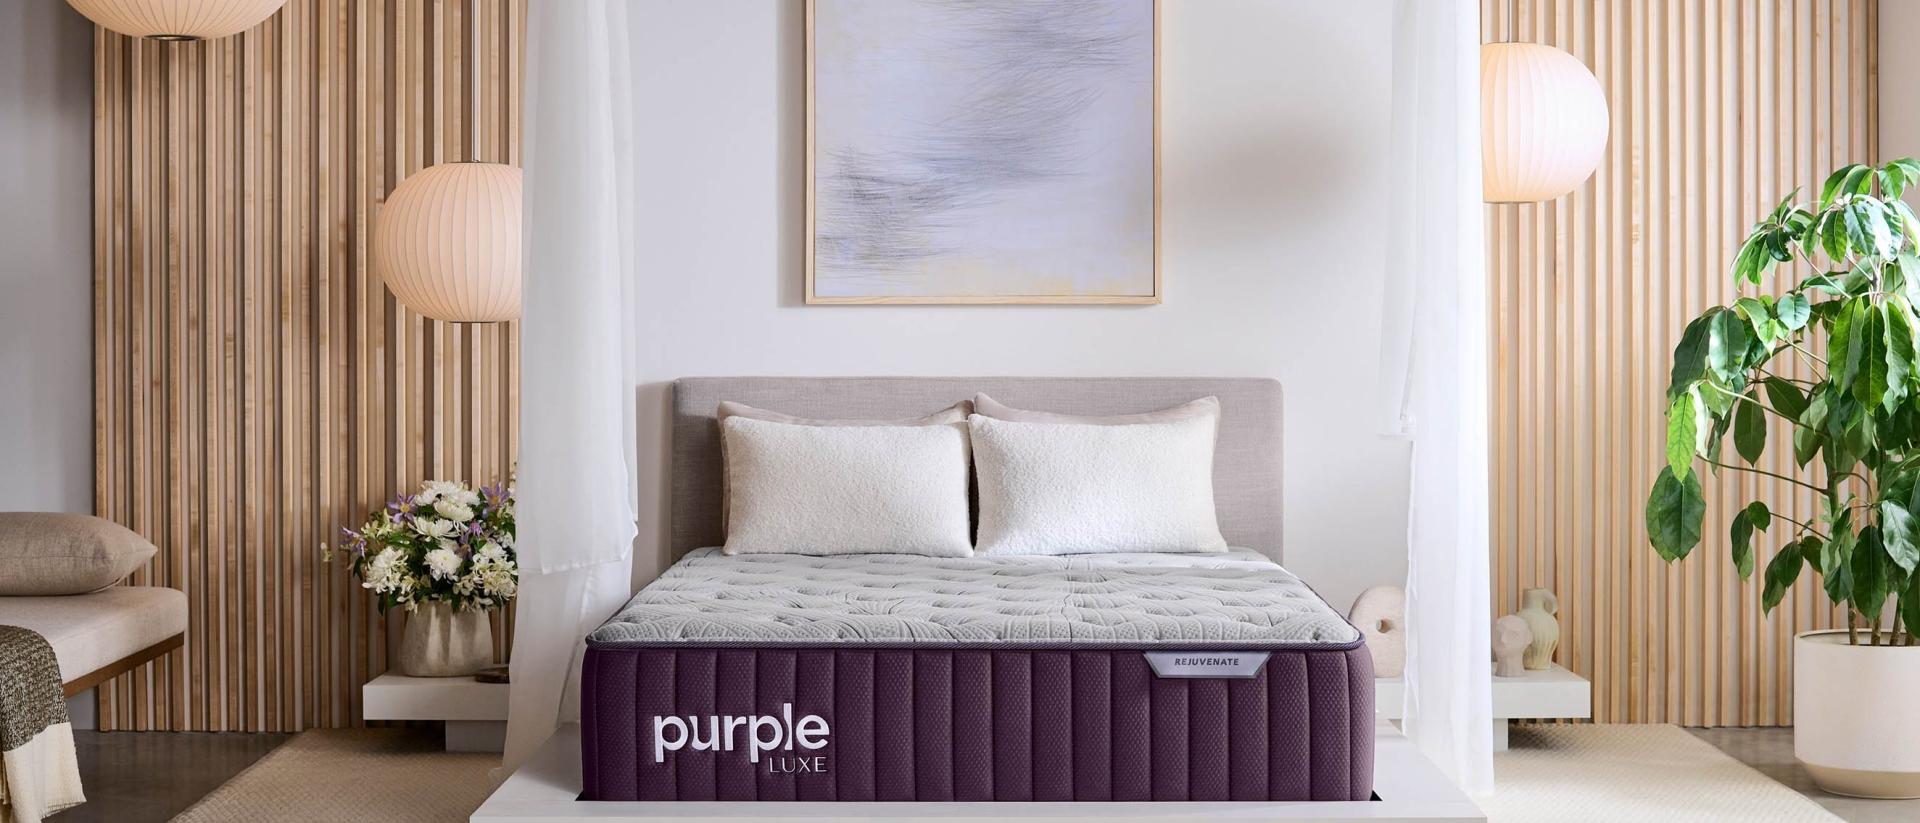 Bedroom with a grey bed frame and a Purple Rejuvenate mattress on top.